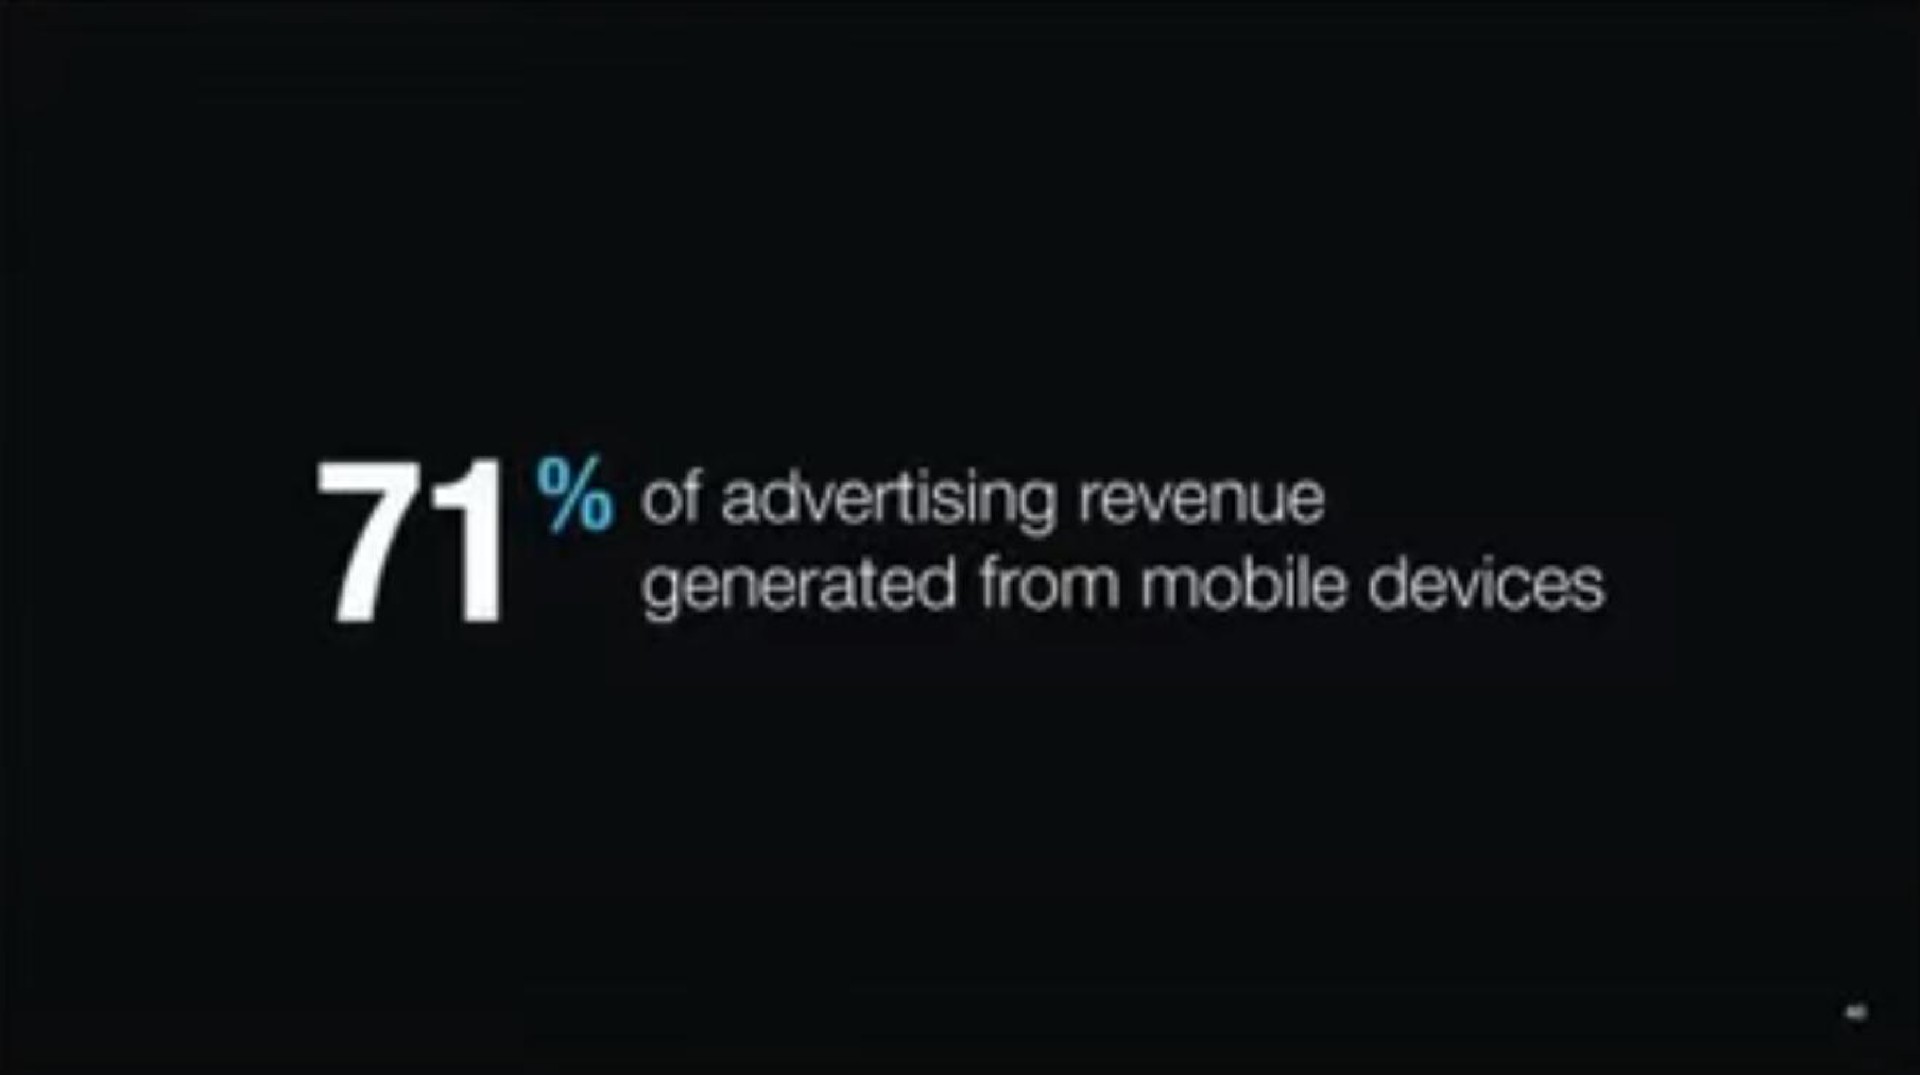 of advertising revenue generated from mobile devices | Twitter